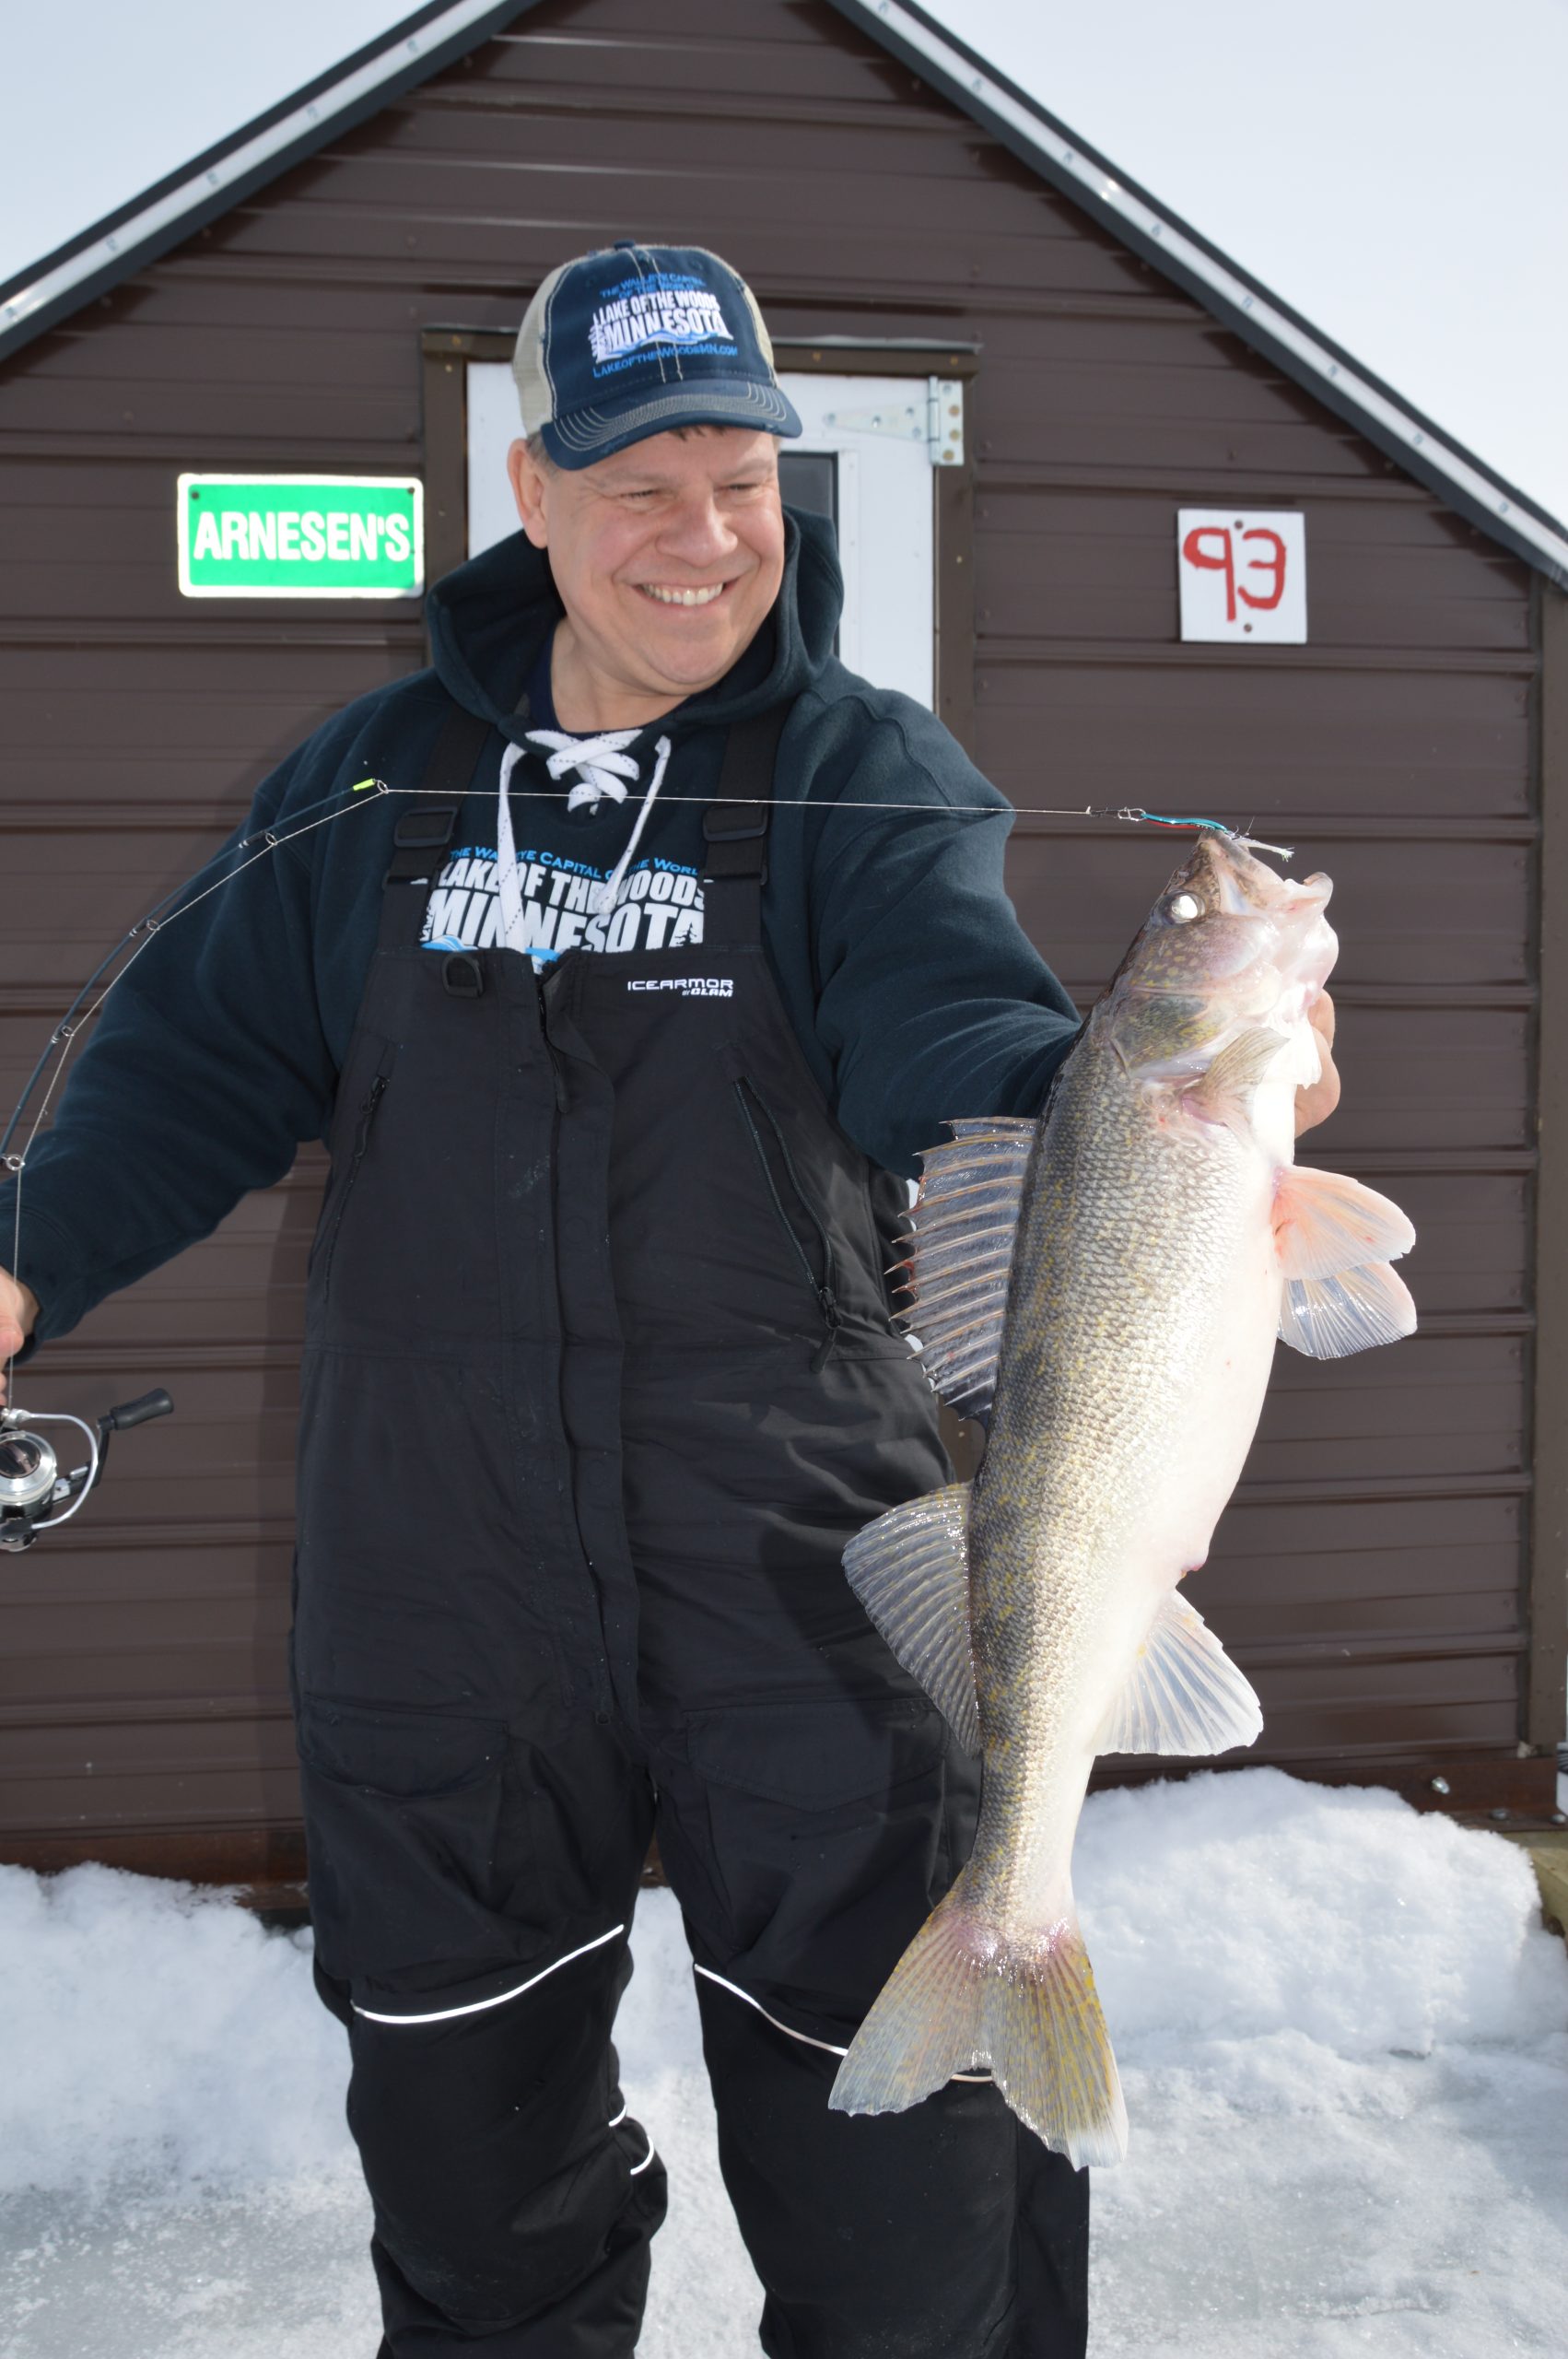 March ice fishing for walleyes on Lake of the Woods